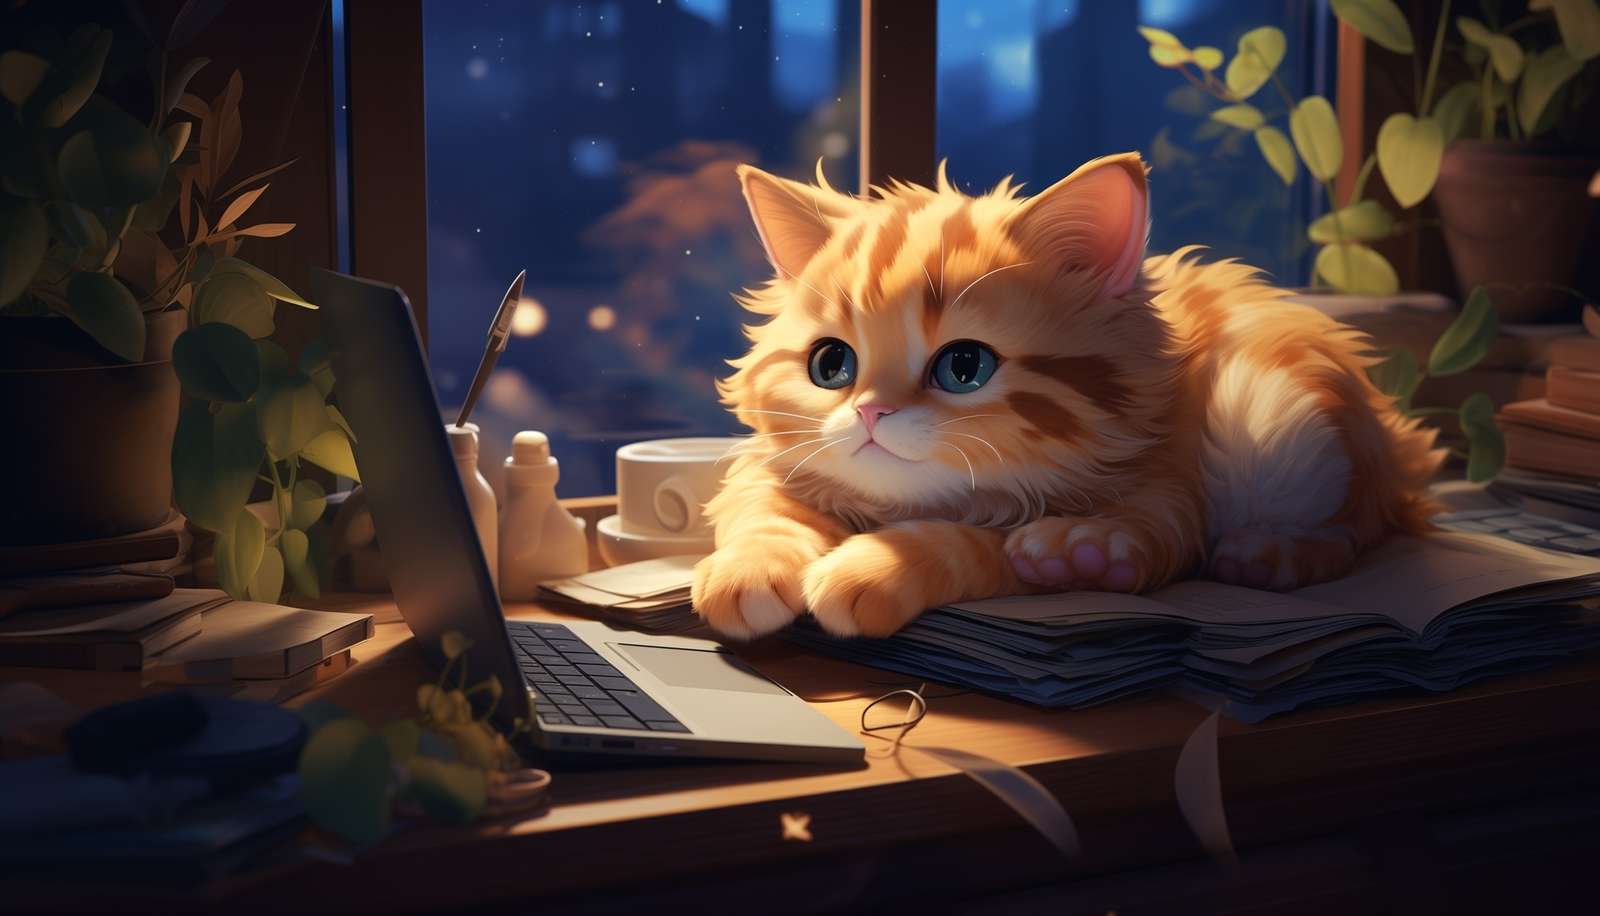 A ginger kitten lying on a book near a laptop online puzzle